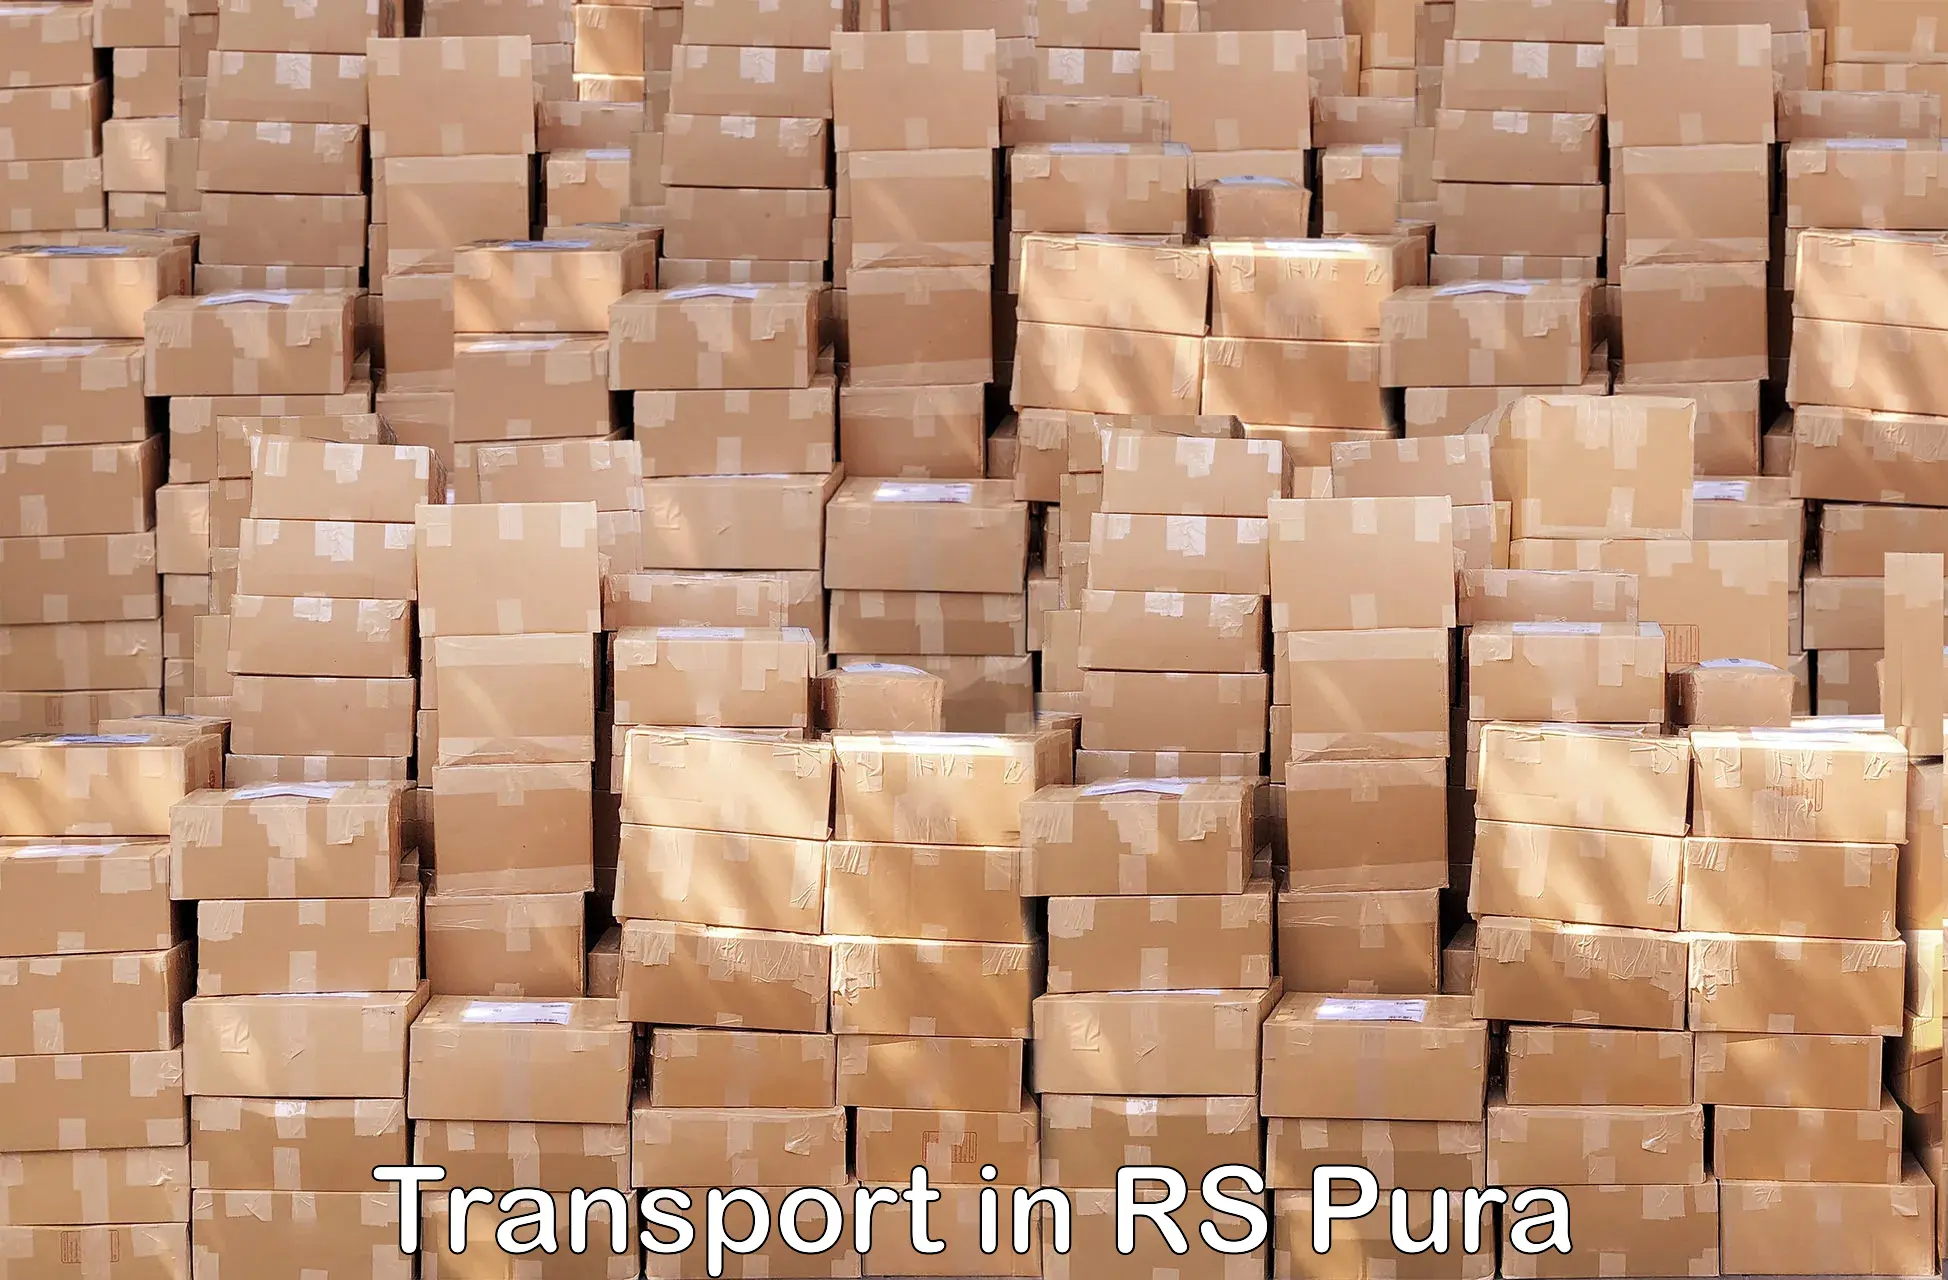 Daily parcel service transport in RS Pura